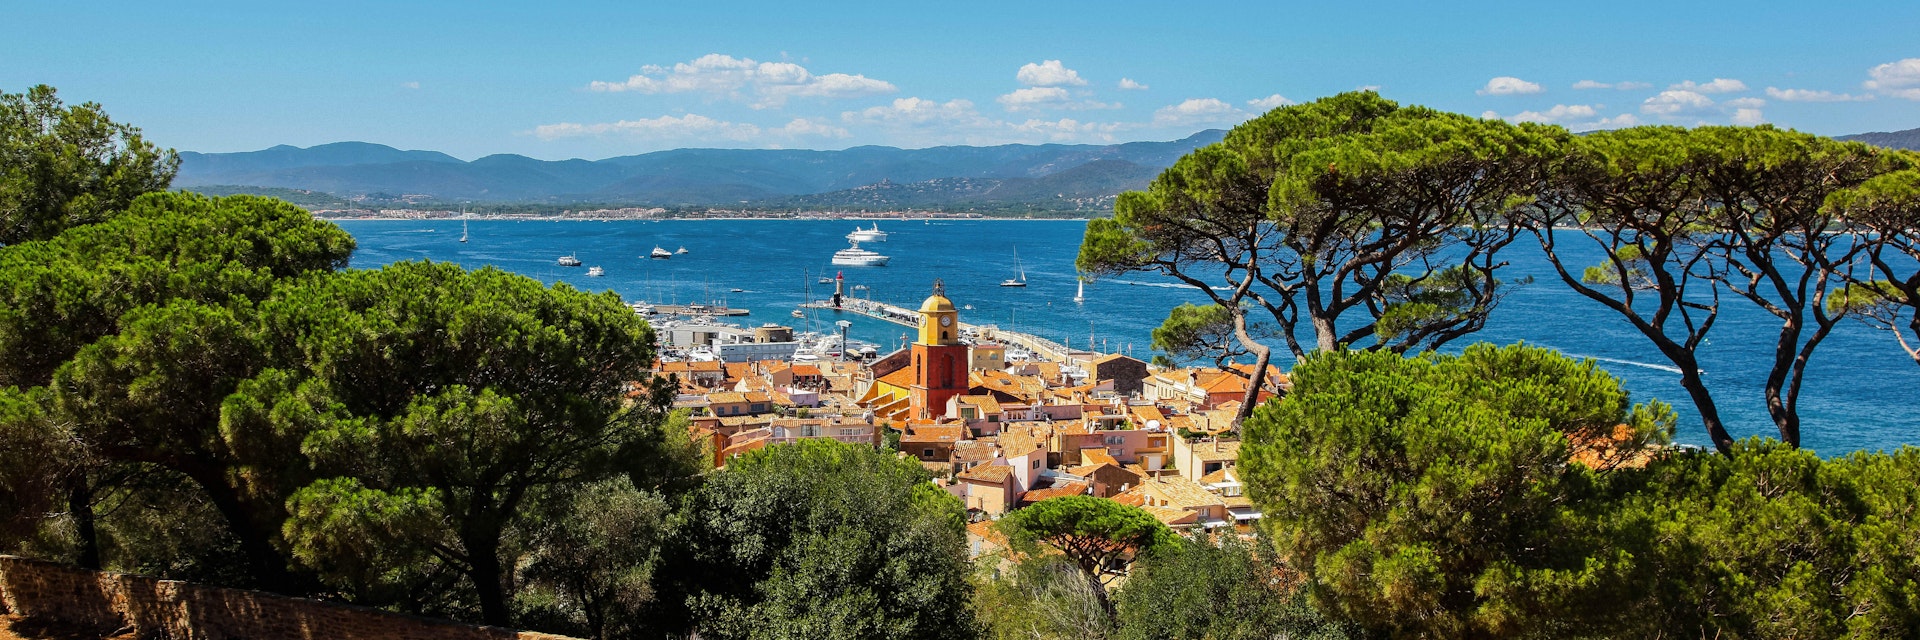 St Tropez old town with the clock tower and harbour, as seen from the citadel.
1119505355
aerial, architecture, bay, boats, buildings, charming, citadel, city, cityscape, clock, coast, coastline, destination, europe, european, famous, france, french, harbor, hill, historic, holiday, landscape, mediterranean, nature, old town, outdoor, panorama, panoramic, port, riviera, rooftops, saint tropez, scenic, sea, sky, southern france, st tropez, summer, tourism, tourist, tower, town, travel, trees, vacation, view, village, water, yachts